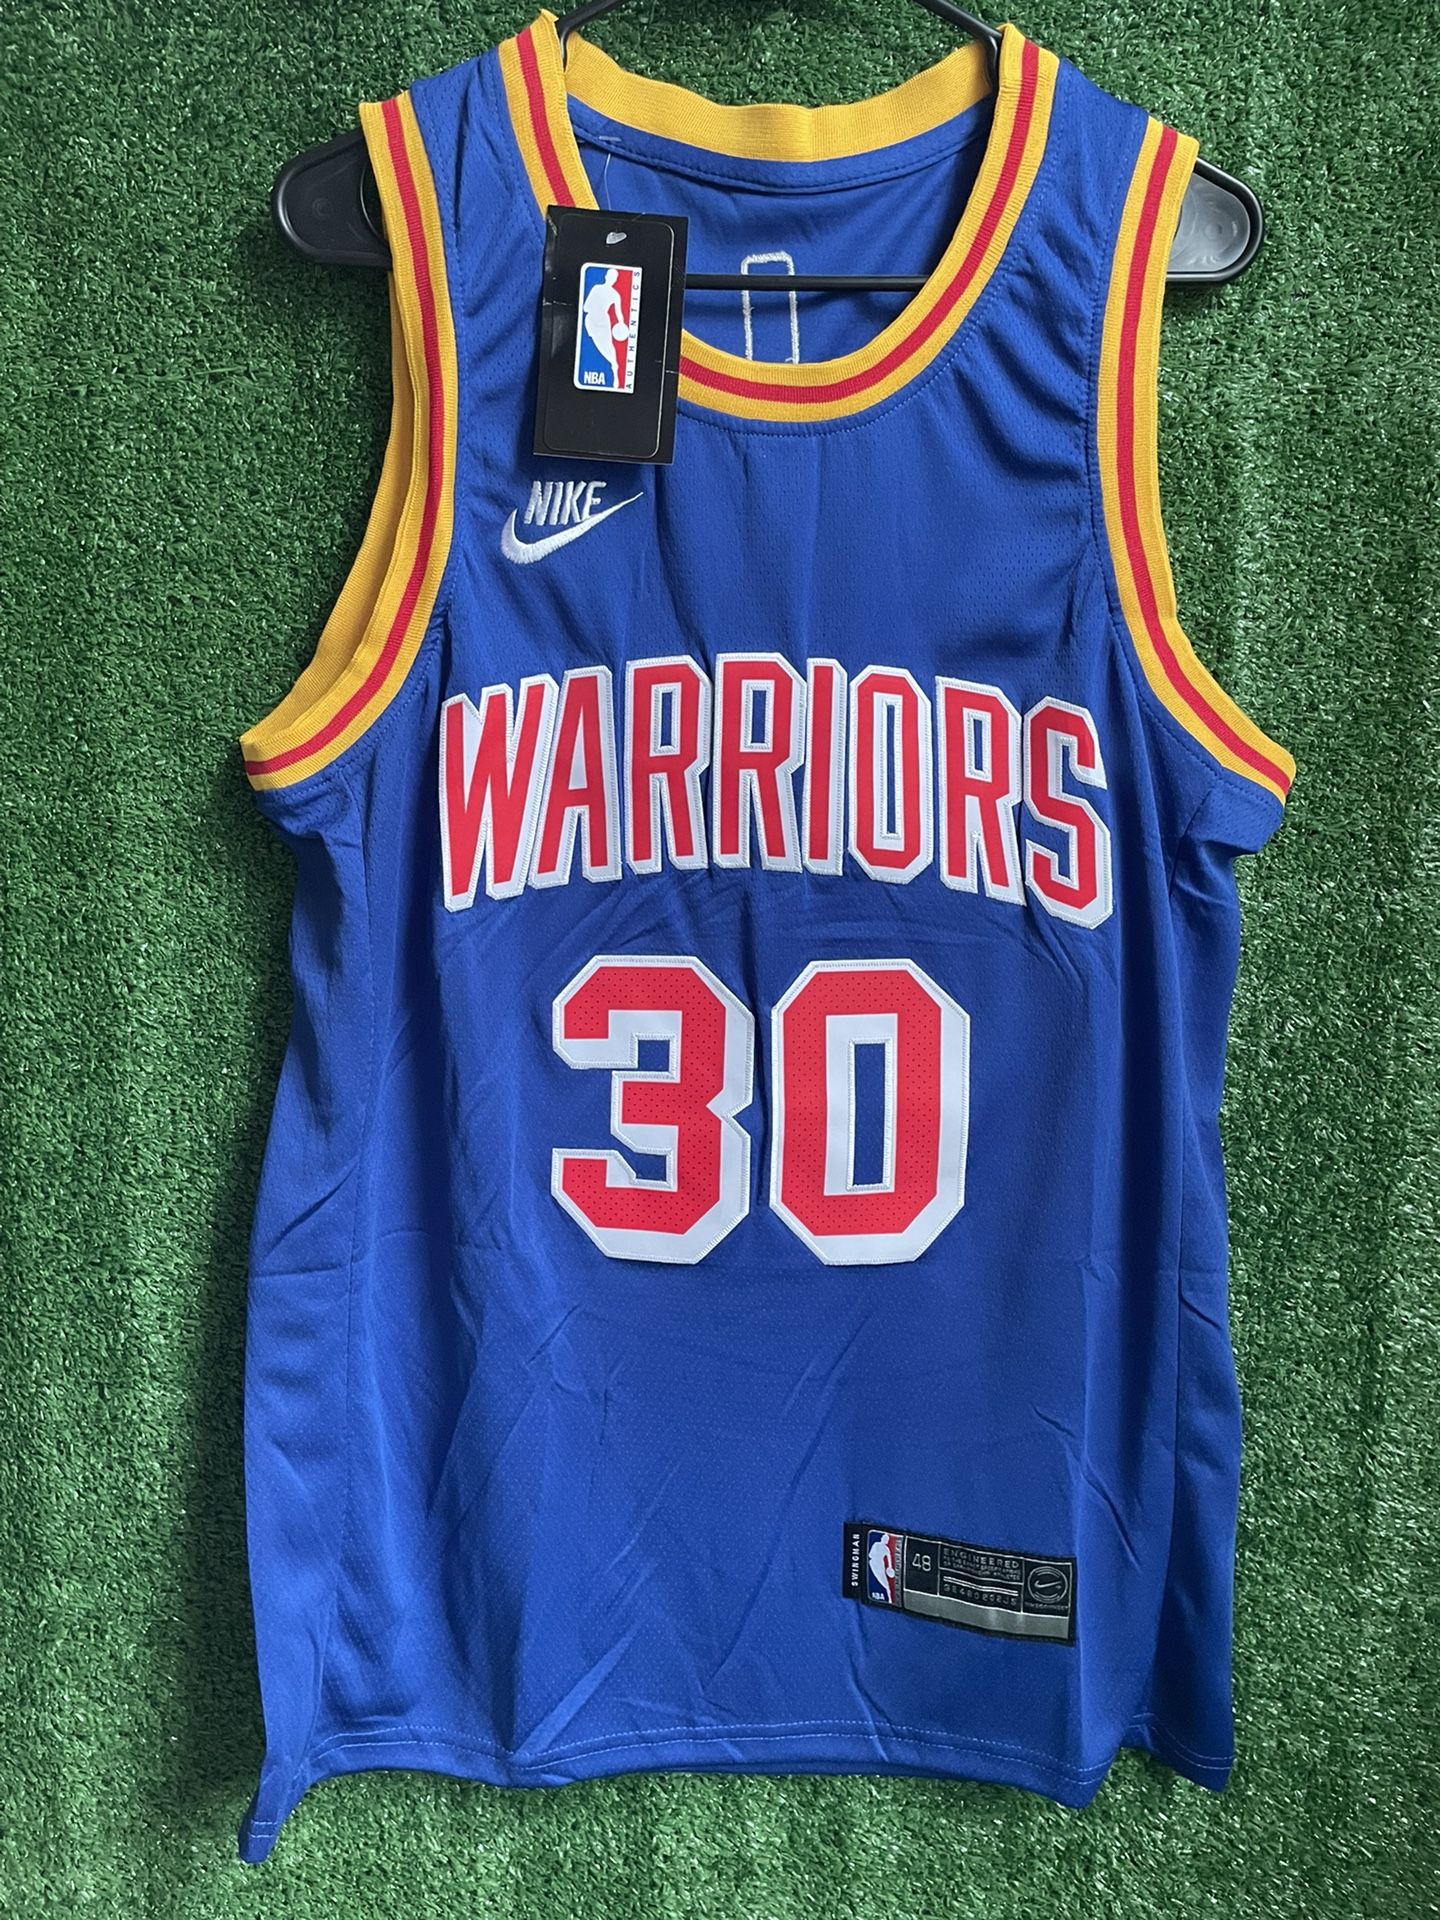 STEPHEN CURRY GOLDEN STATE WARRIORS NIKE JERSEY BRAND NEW WITH TAGS SIZES MEDIUM, LARGE AND XL AVAILABLE